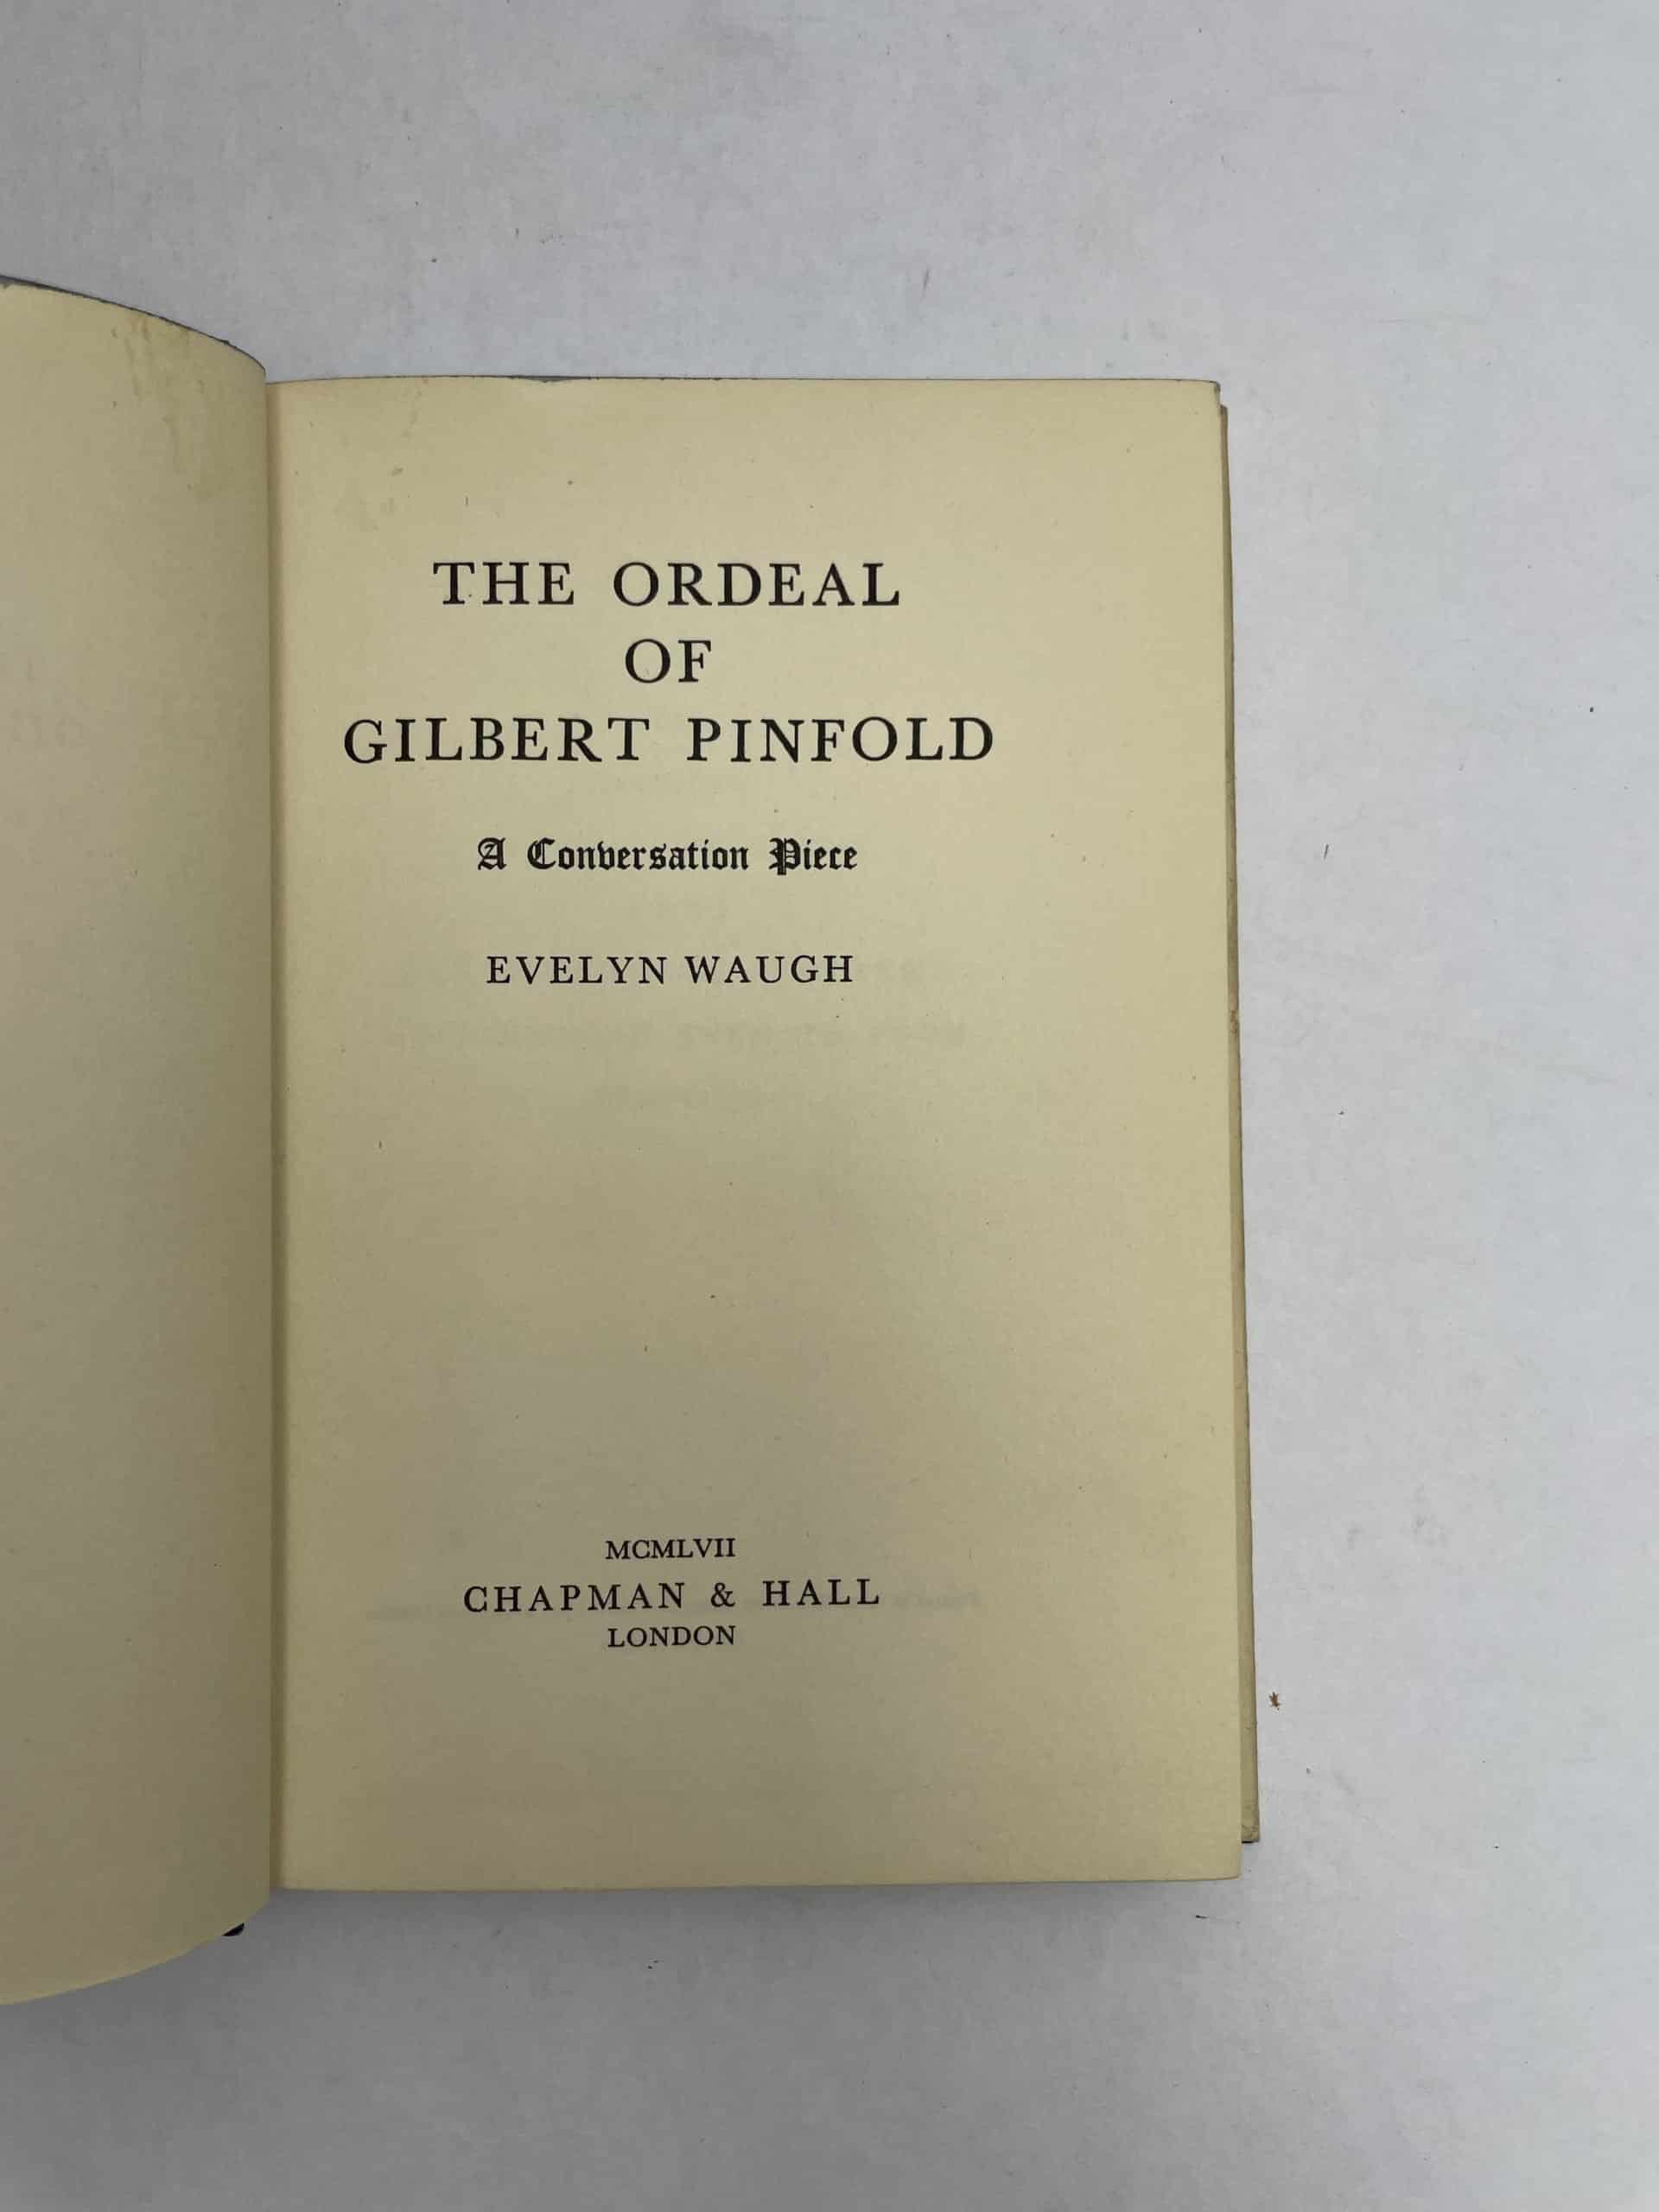 evelyn waugh the ordeal of gilbert pinfold first 2